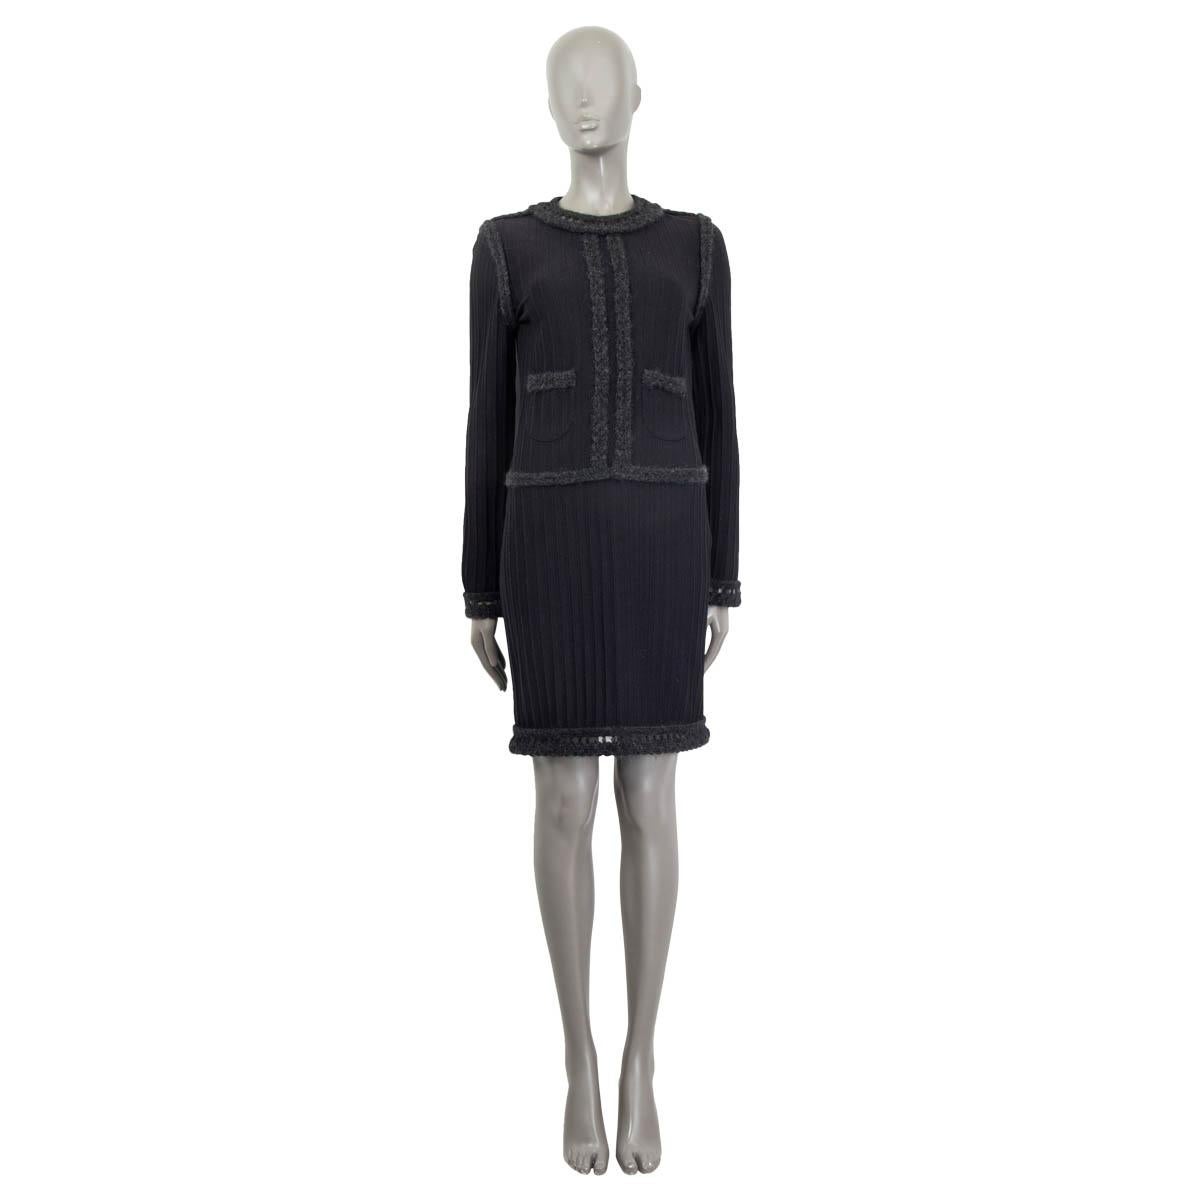 100% authentic Chanel 2010 crochet trim knit dress in black and charcoal wool (61%), nylon (23%) and mohair (16%). Features long sleeves and two patch pockets on the front. Opens with a concealed zipper at the side and two 'CC' buttons at the back.